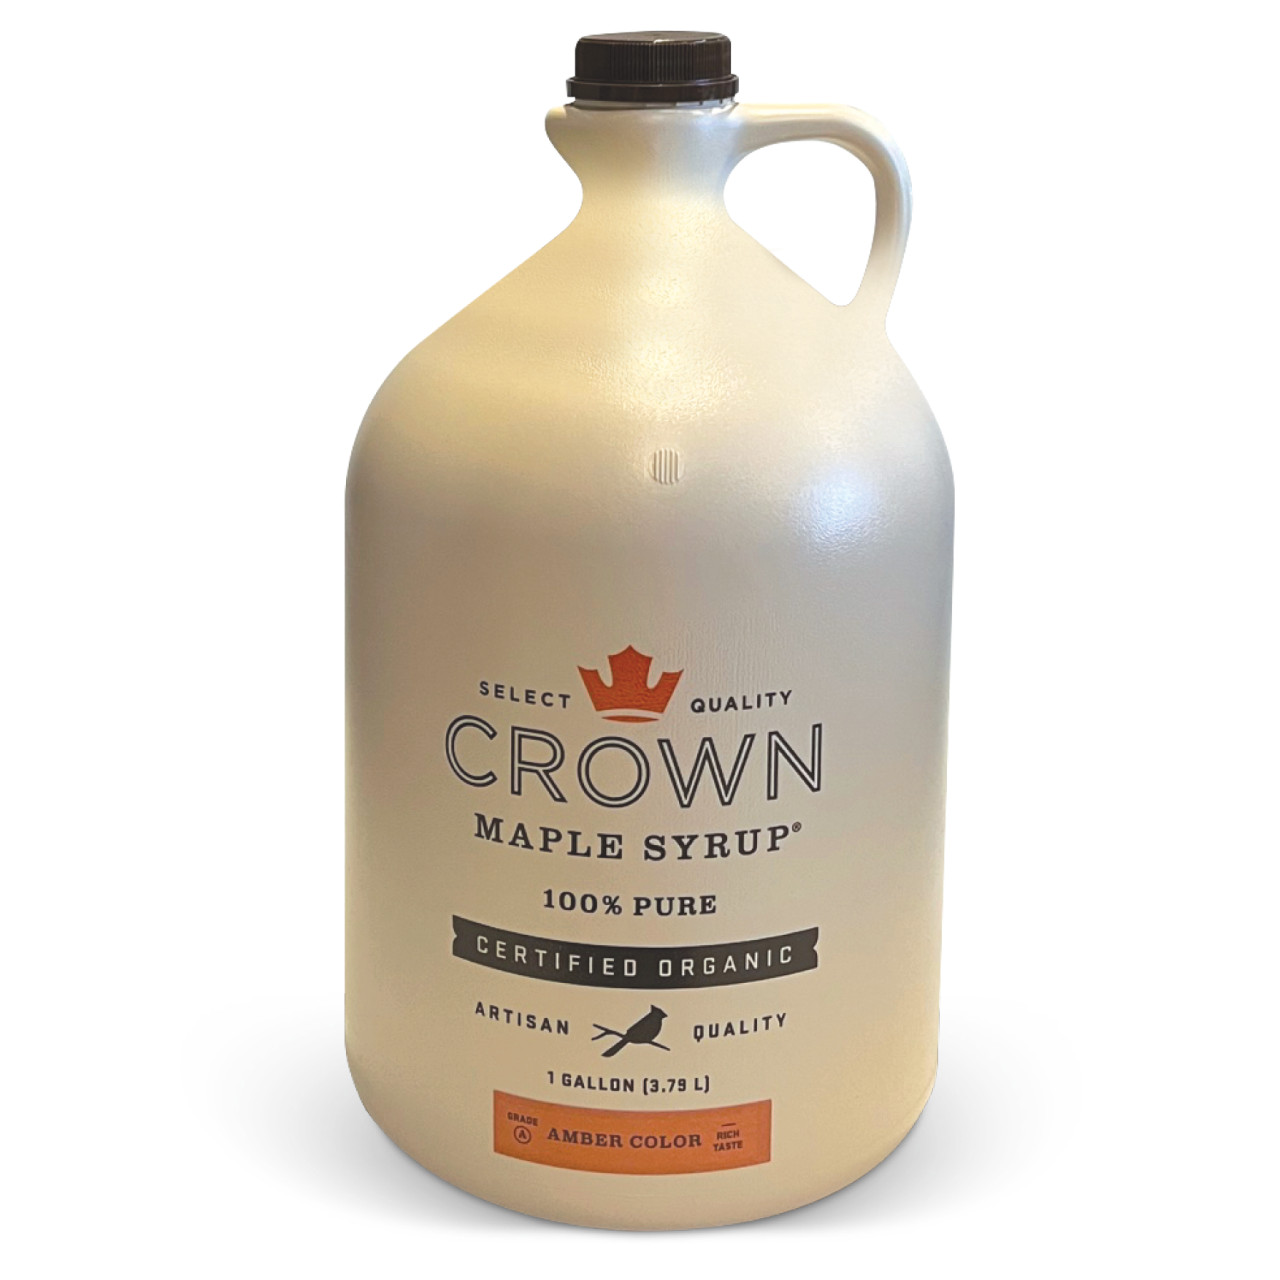 Pure Maple Syrup, Crown Maple Syrup